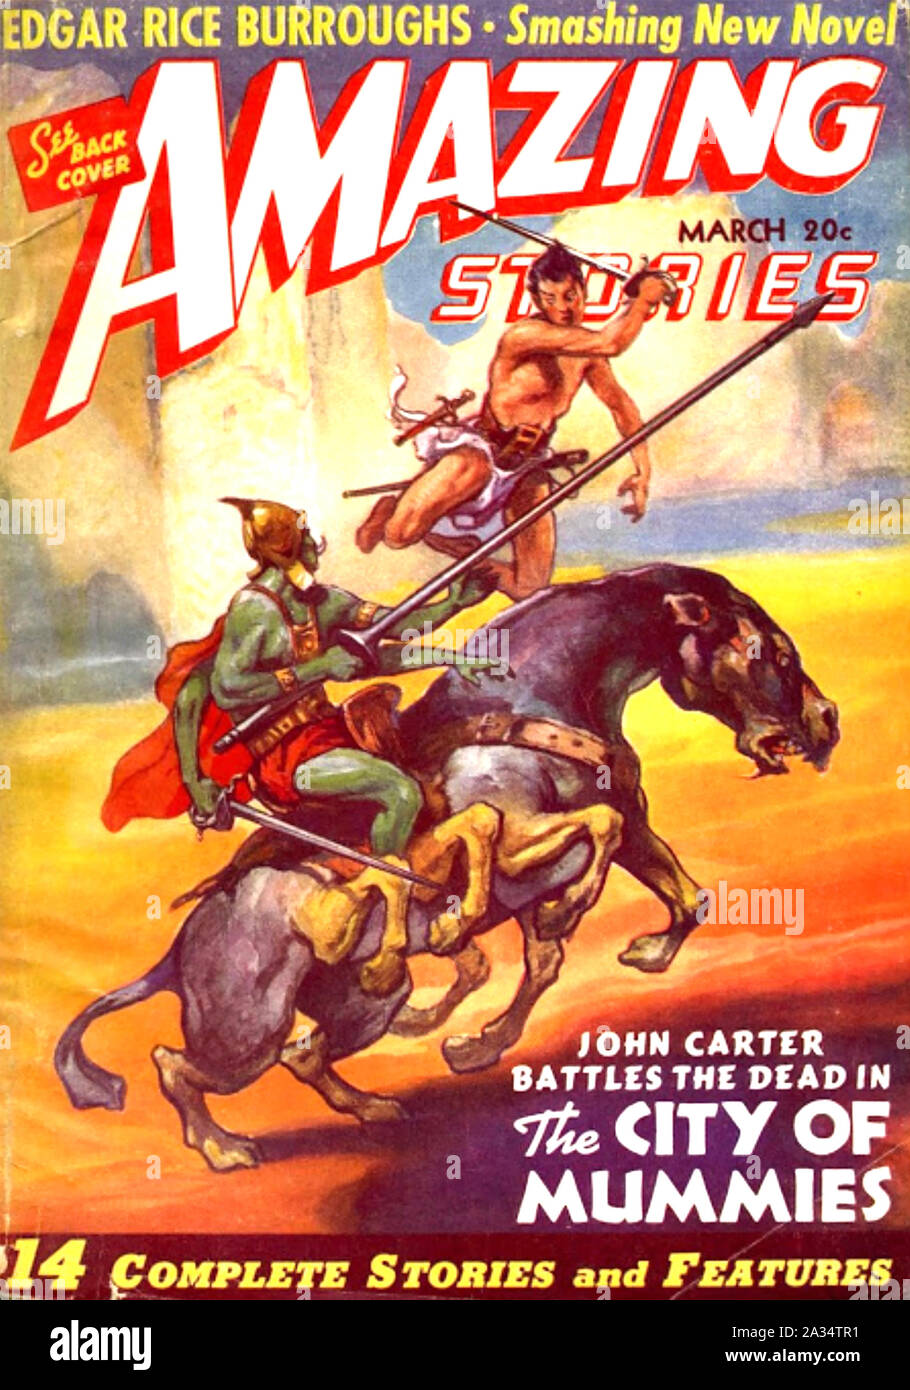 AMAZING STORIES American sci-fi magazine edited by Hugo Gernsback with cover by James All St. John. March 1941 edition. Stock Photo